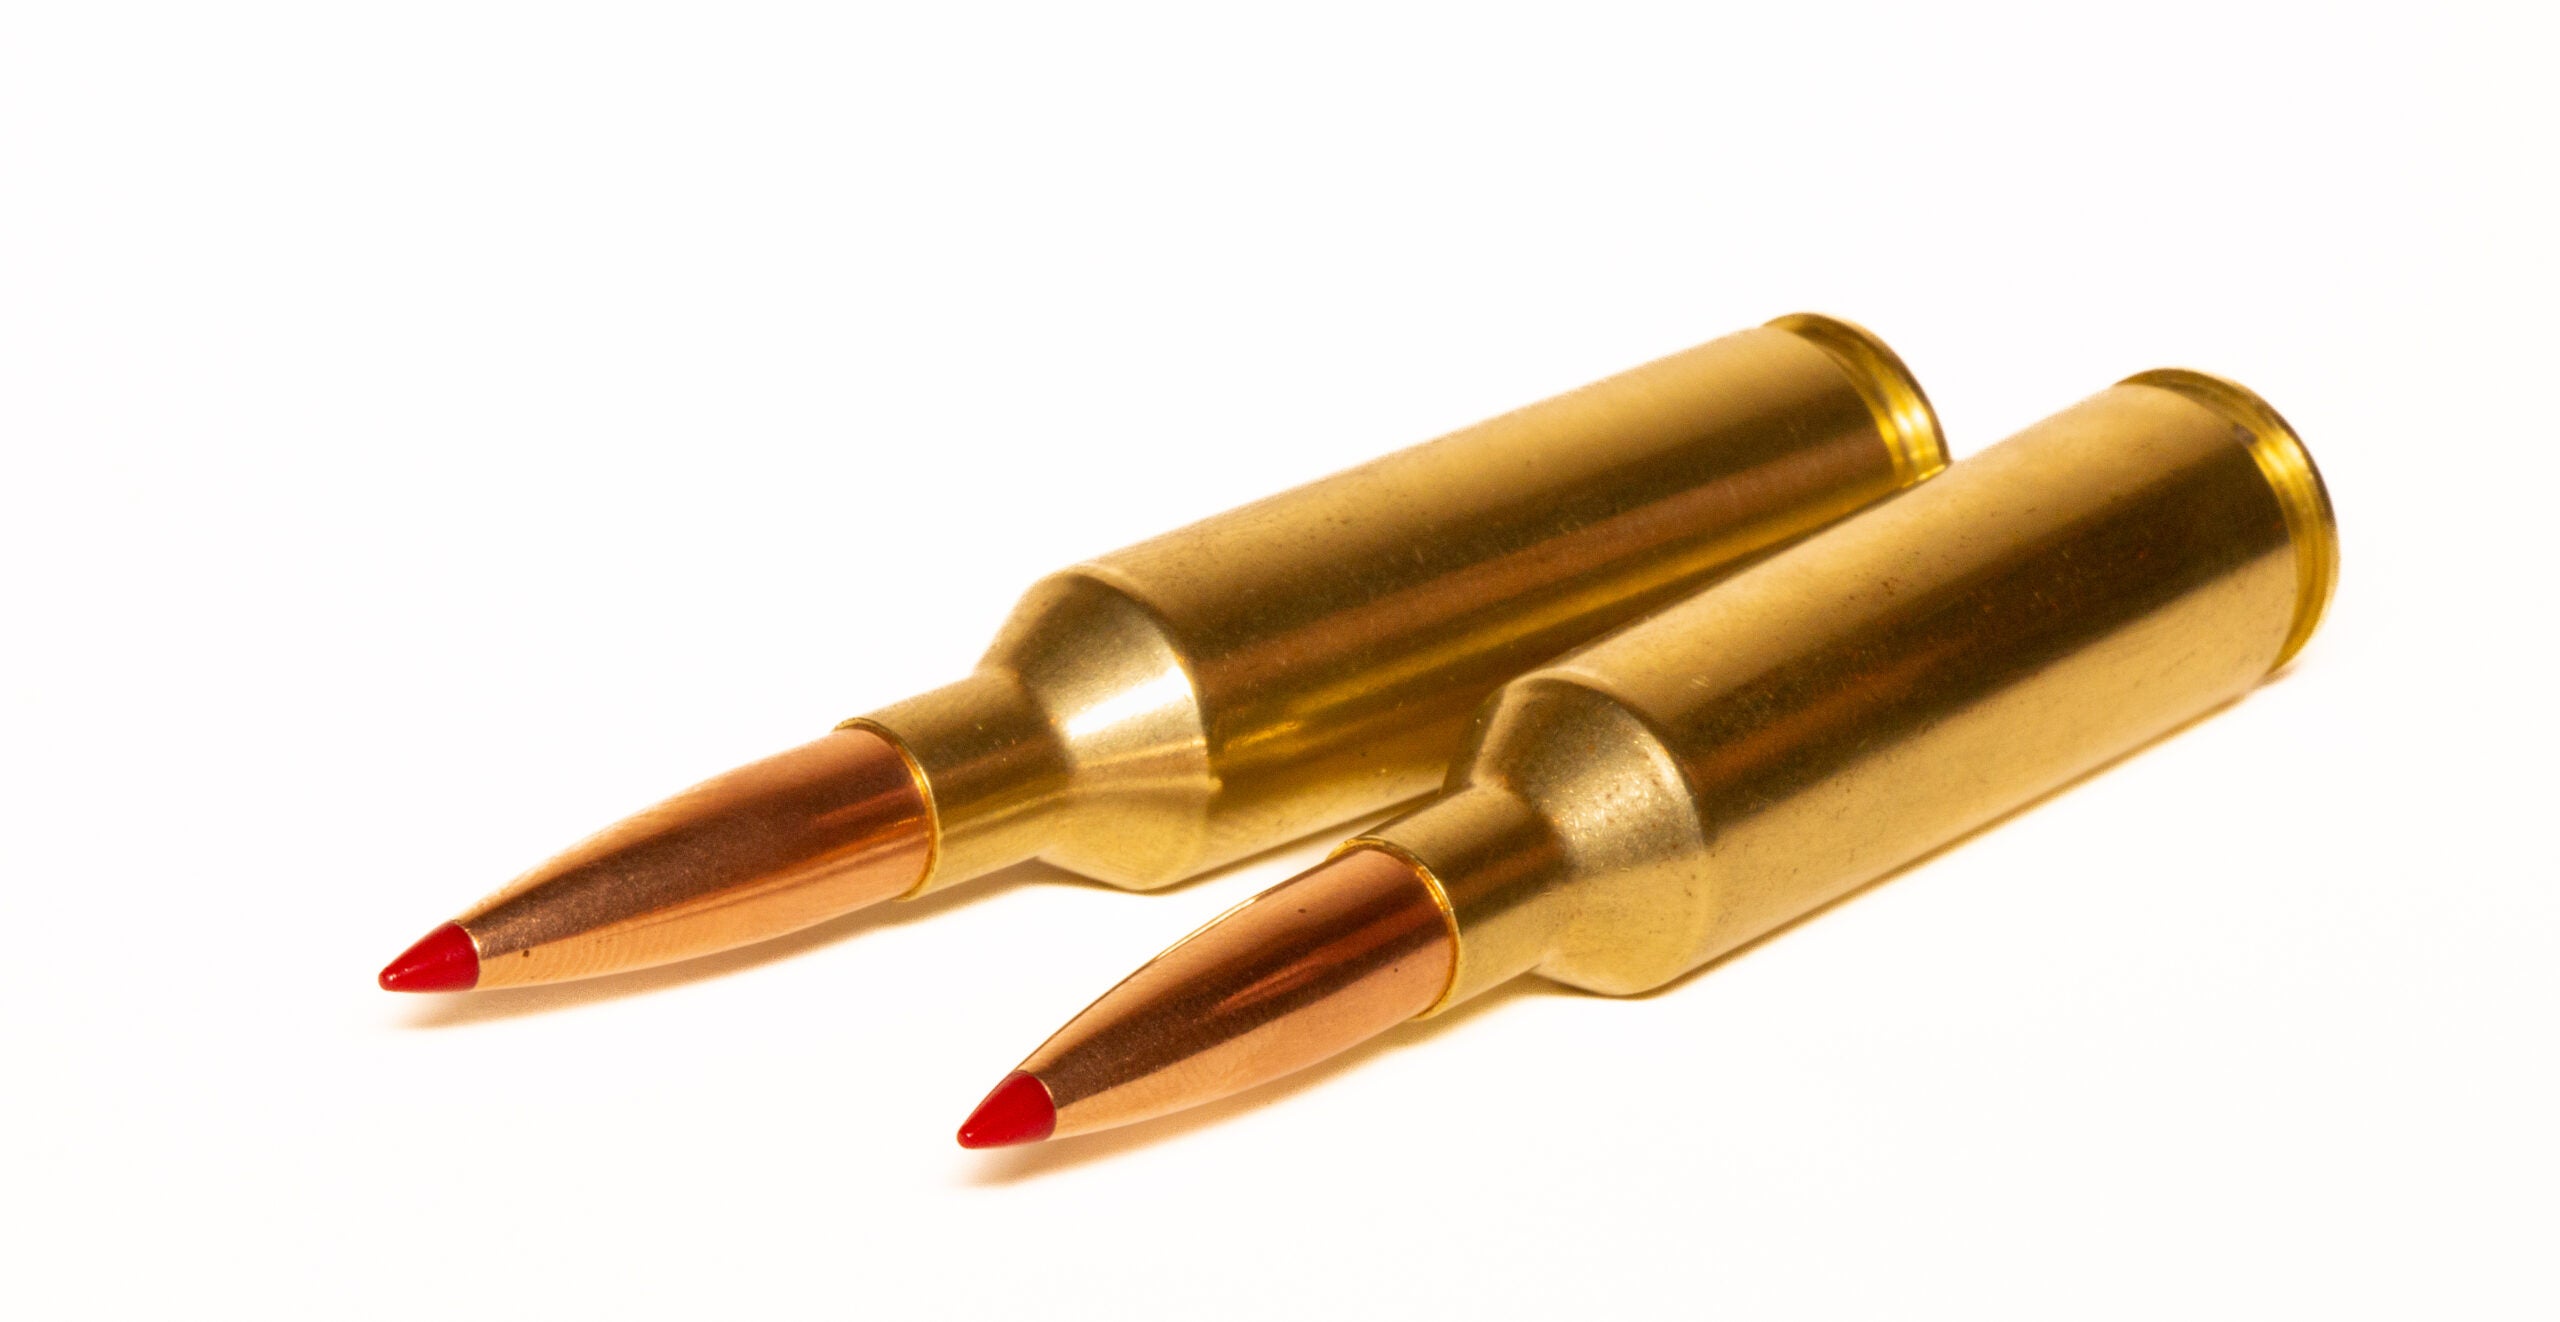 Two Hornady 6.5 PRC cartridges on a white background.